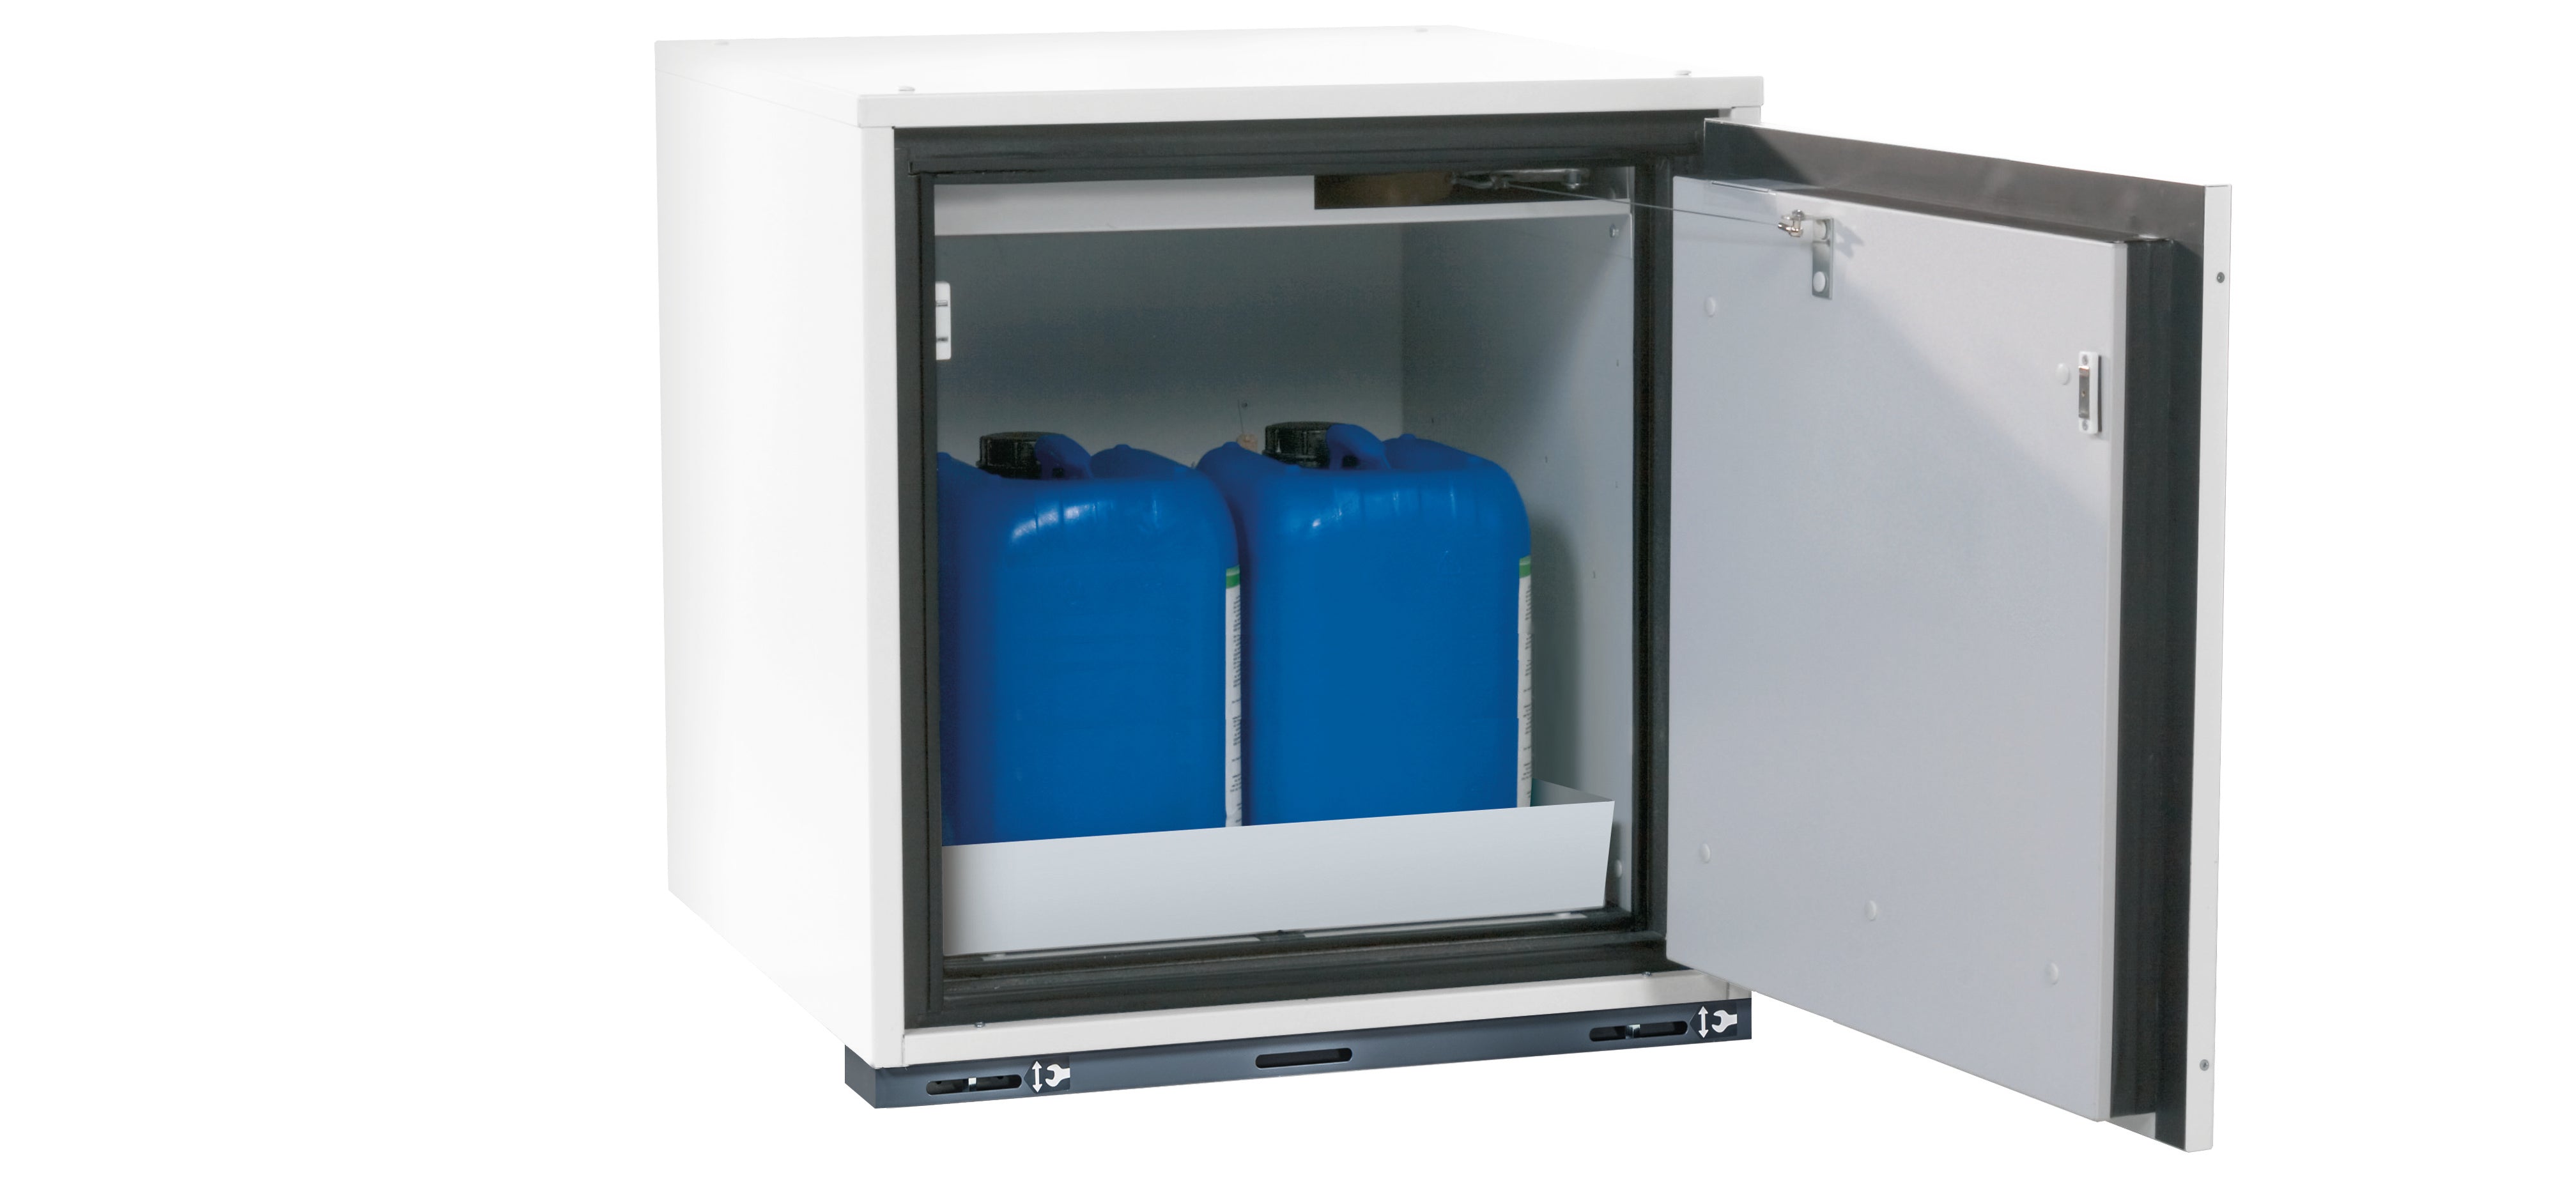 Type 90 safety base cabinet UB-T-90 model UB90.060.059.TR in laboratory white (similar to RAL 9016) with 1x perforated plate insert standard (sheet steel)